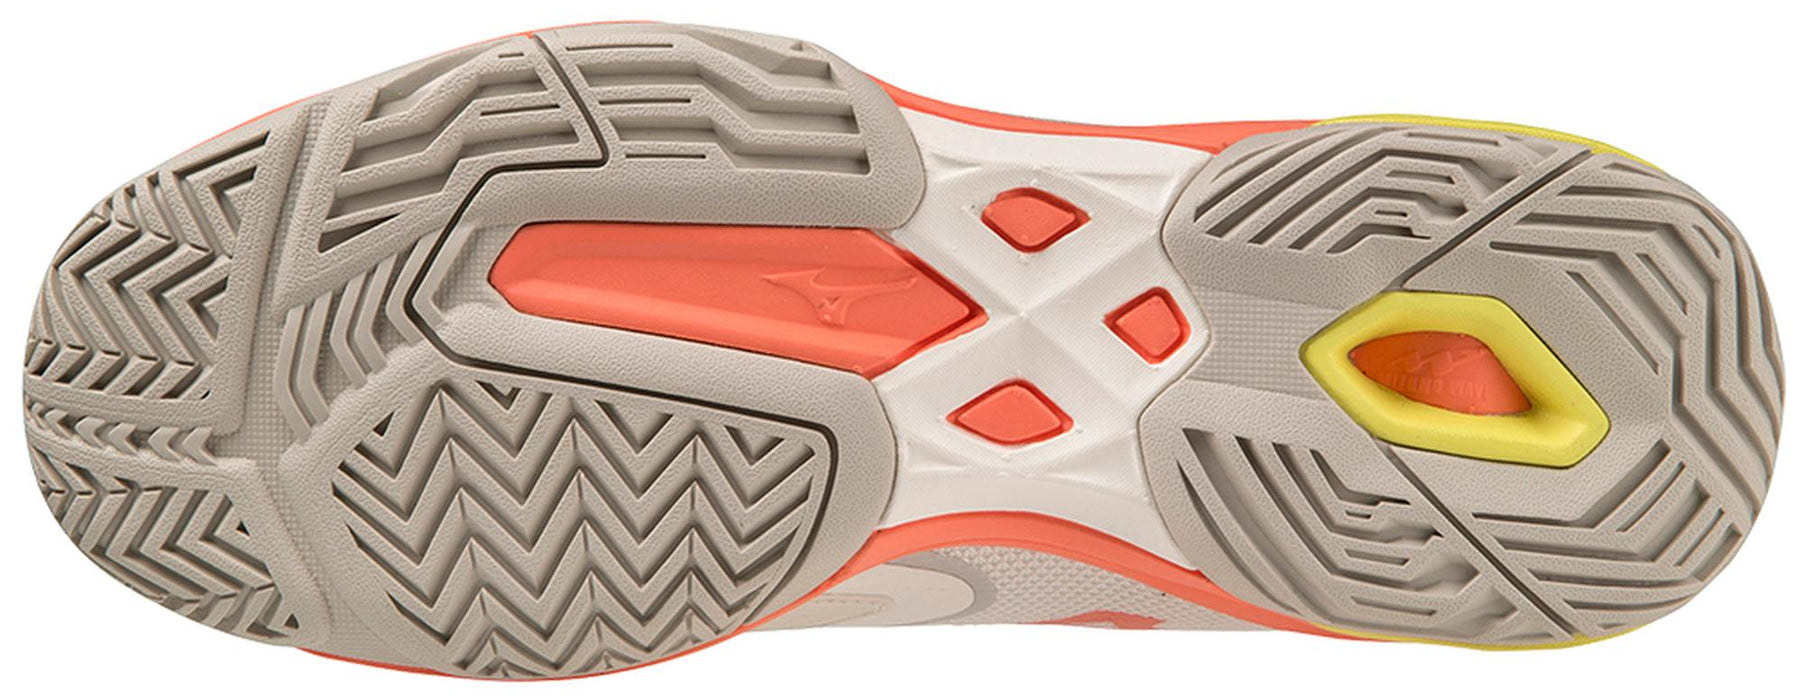 Mizuno Wave Exceed Light 2 AC Women's Tennis/Pickleball Shoes on sale at Badminton Warehouse